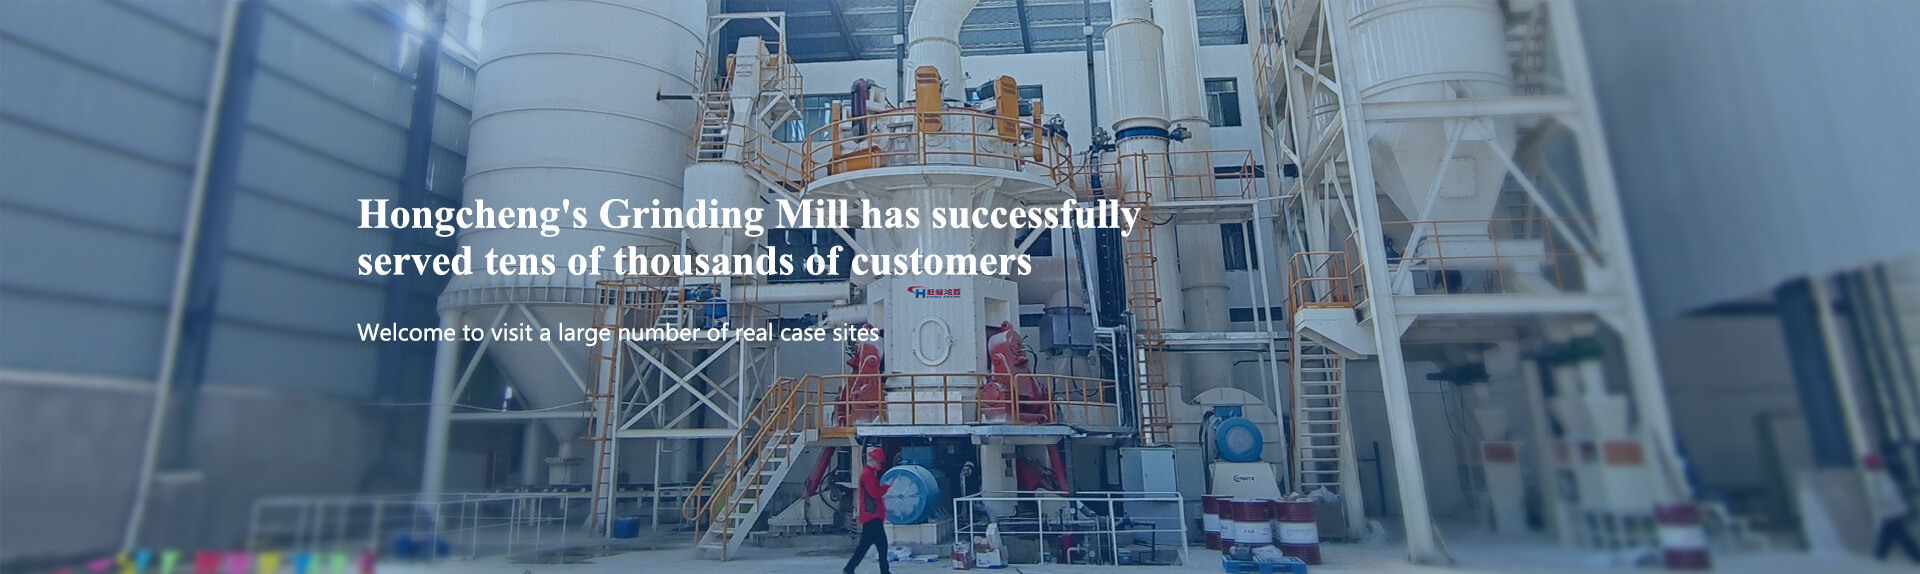 HC1700 Grinding Mill - 500,000t/year manganese powder producing project in Guizhou